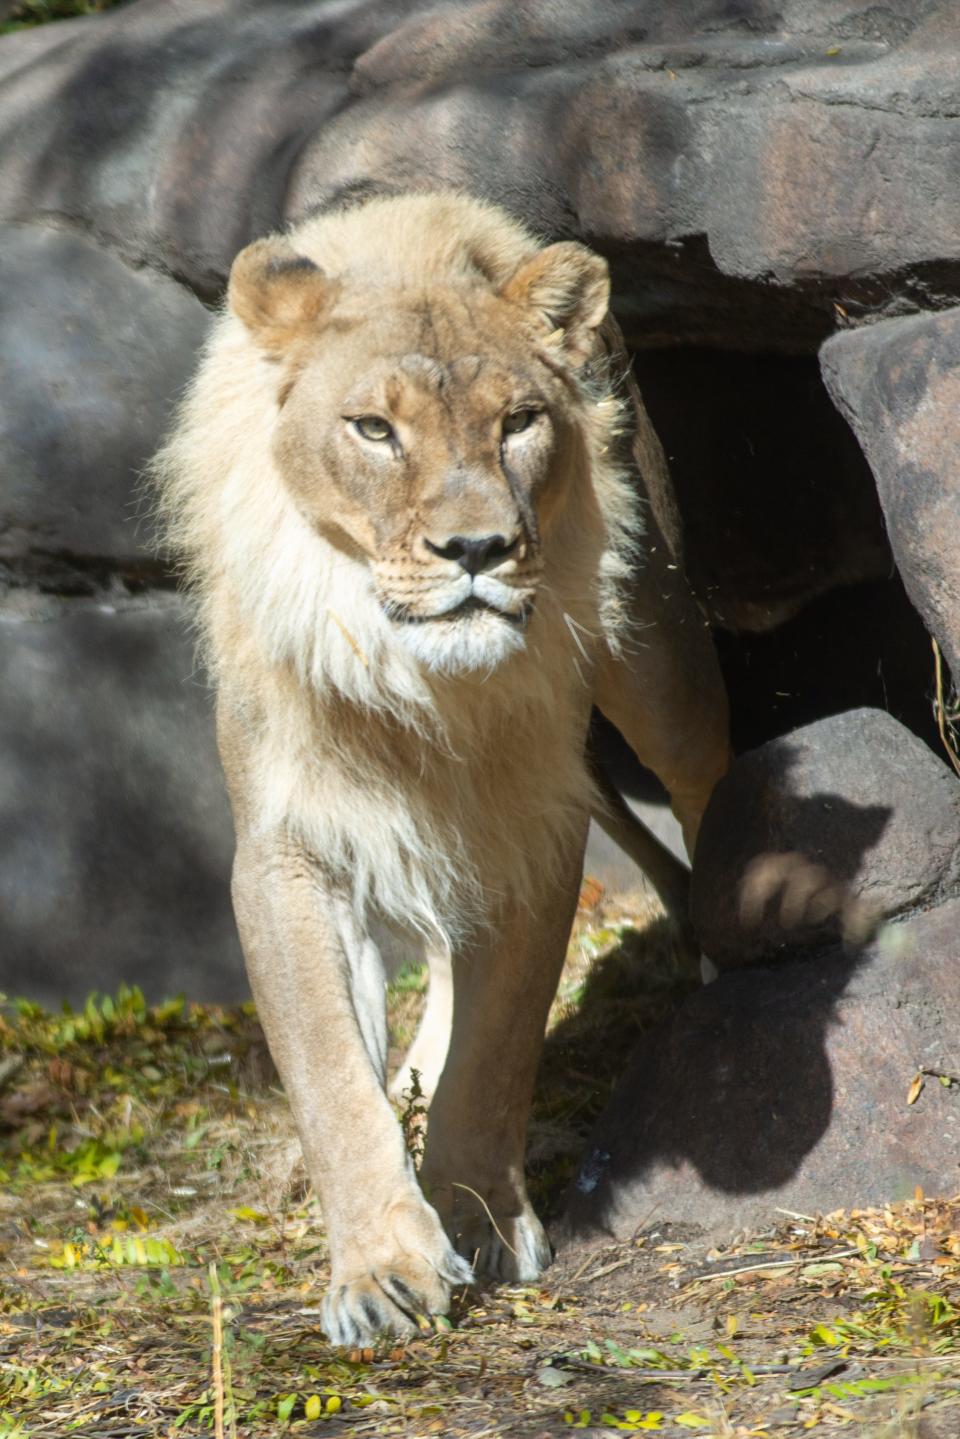 Zuri, a female lion at the Topeka Zoo, comes out from her den to investigate the sounds of an opening door Saturday afternoon. Zuri began growing a mane after her mate's death two years ago.